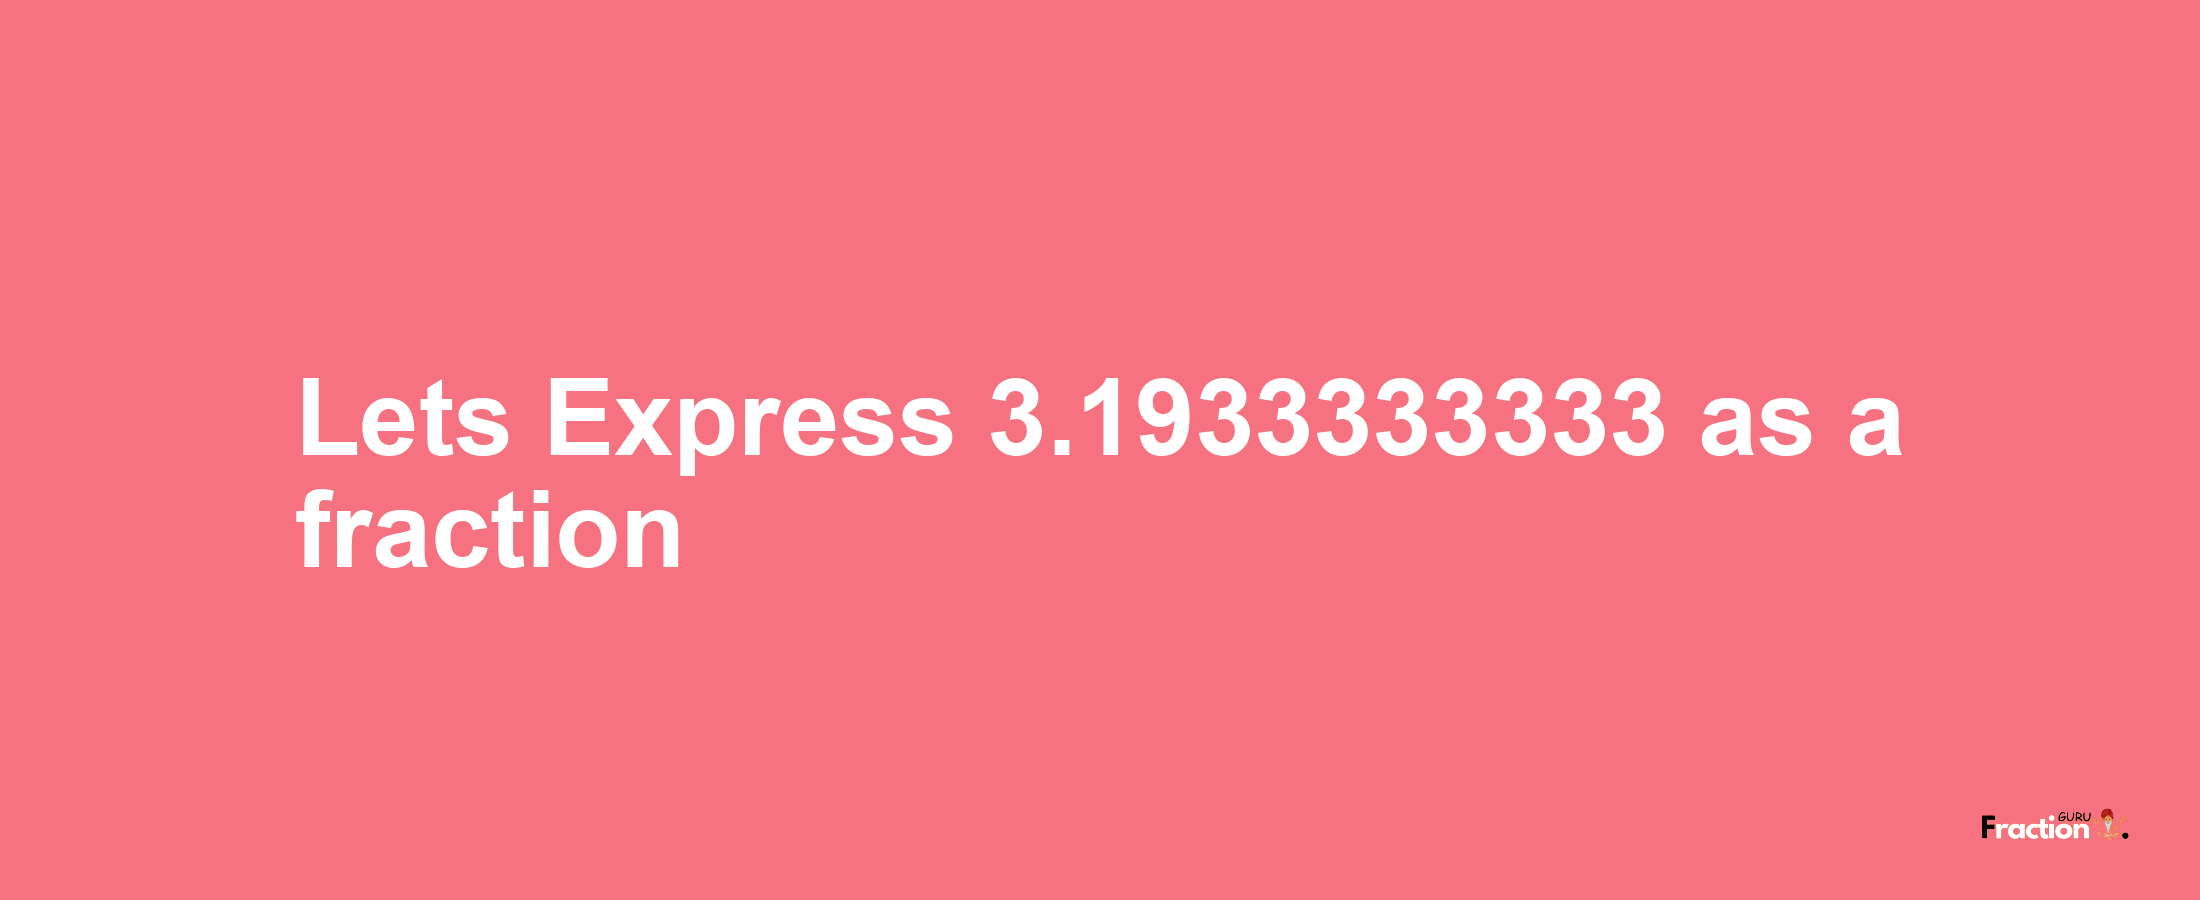 Lets Express 3.1933333333 as afraction